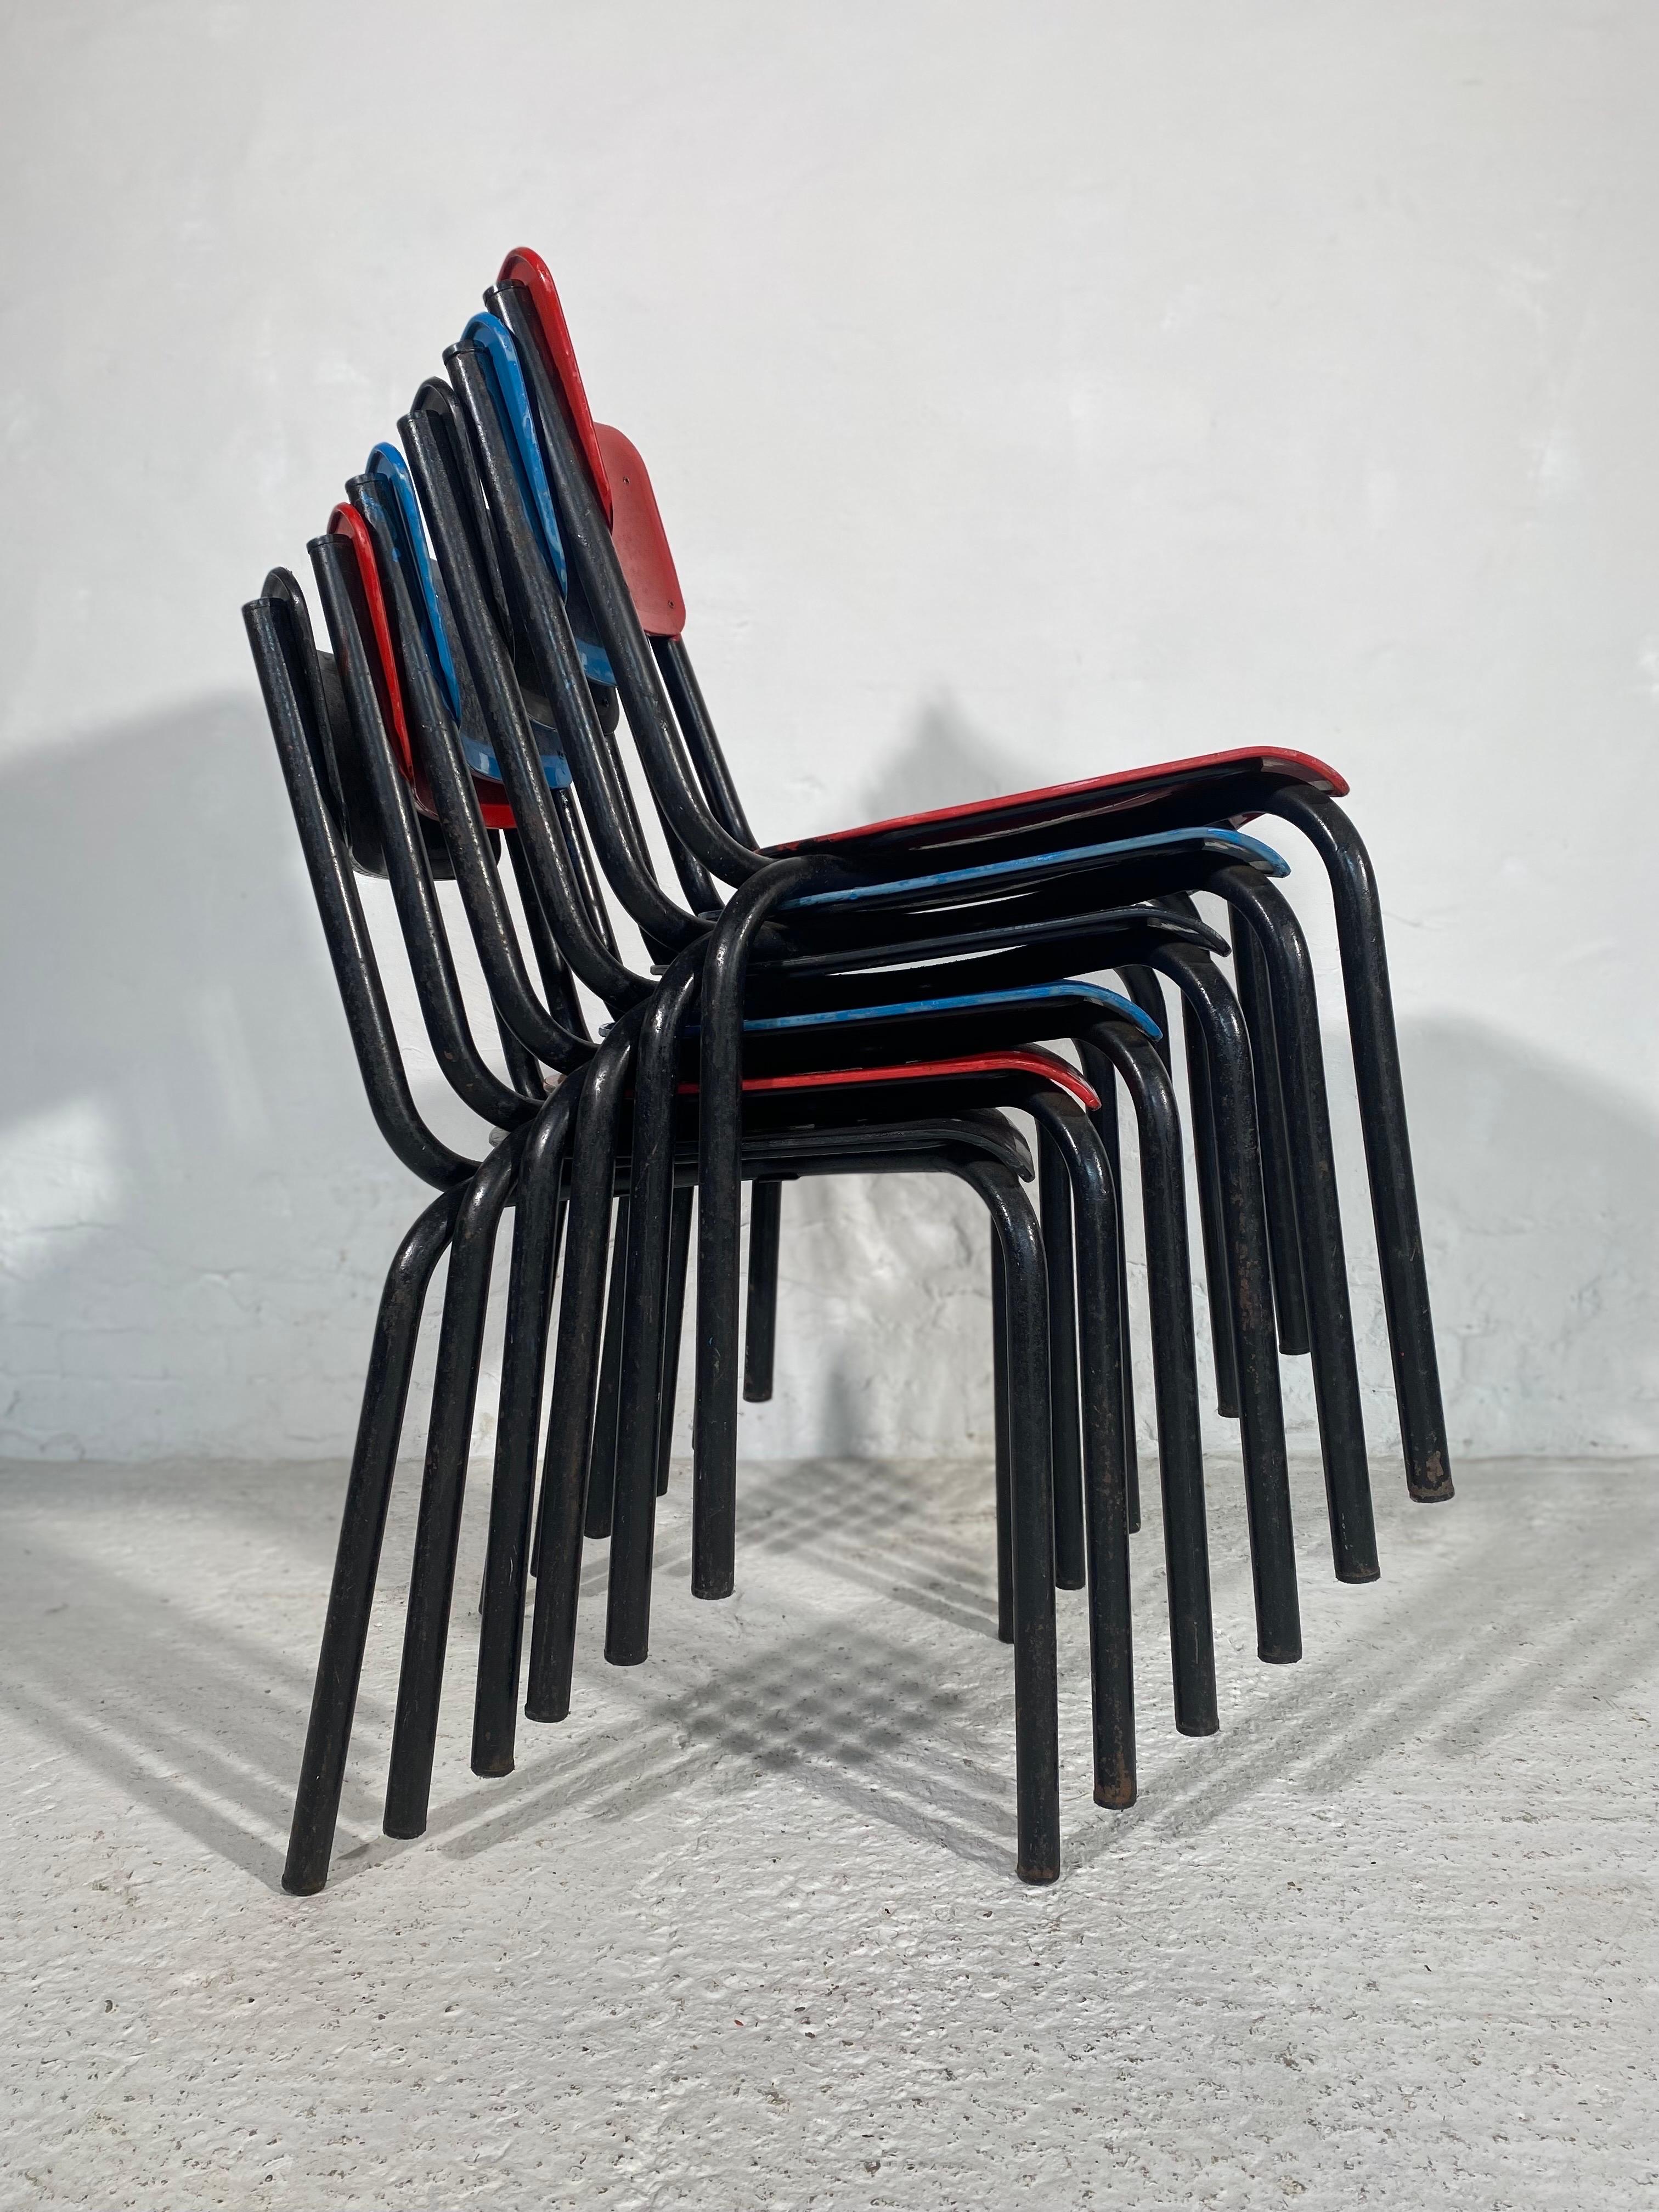 Metal Guarich for Meurop set of Six Stacking Chairs, 
Red, Blue and Black,
1960s
